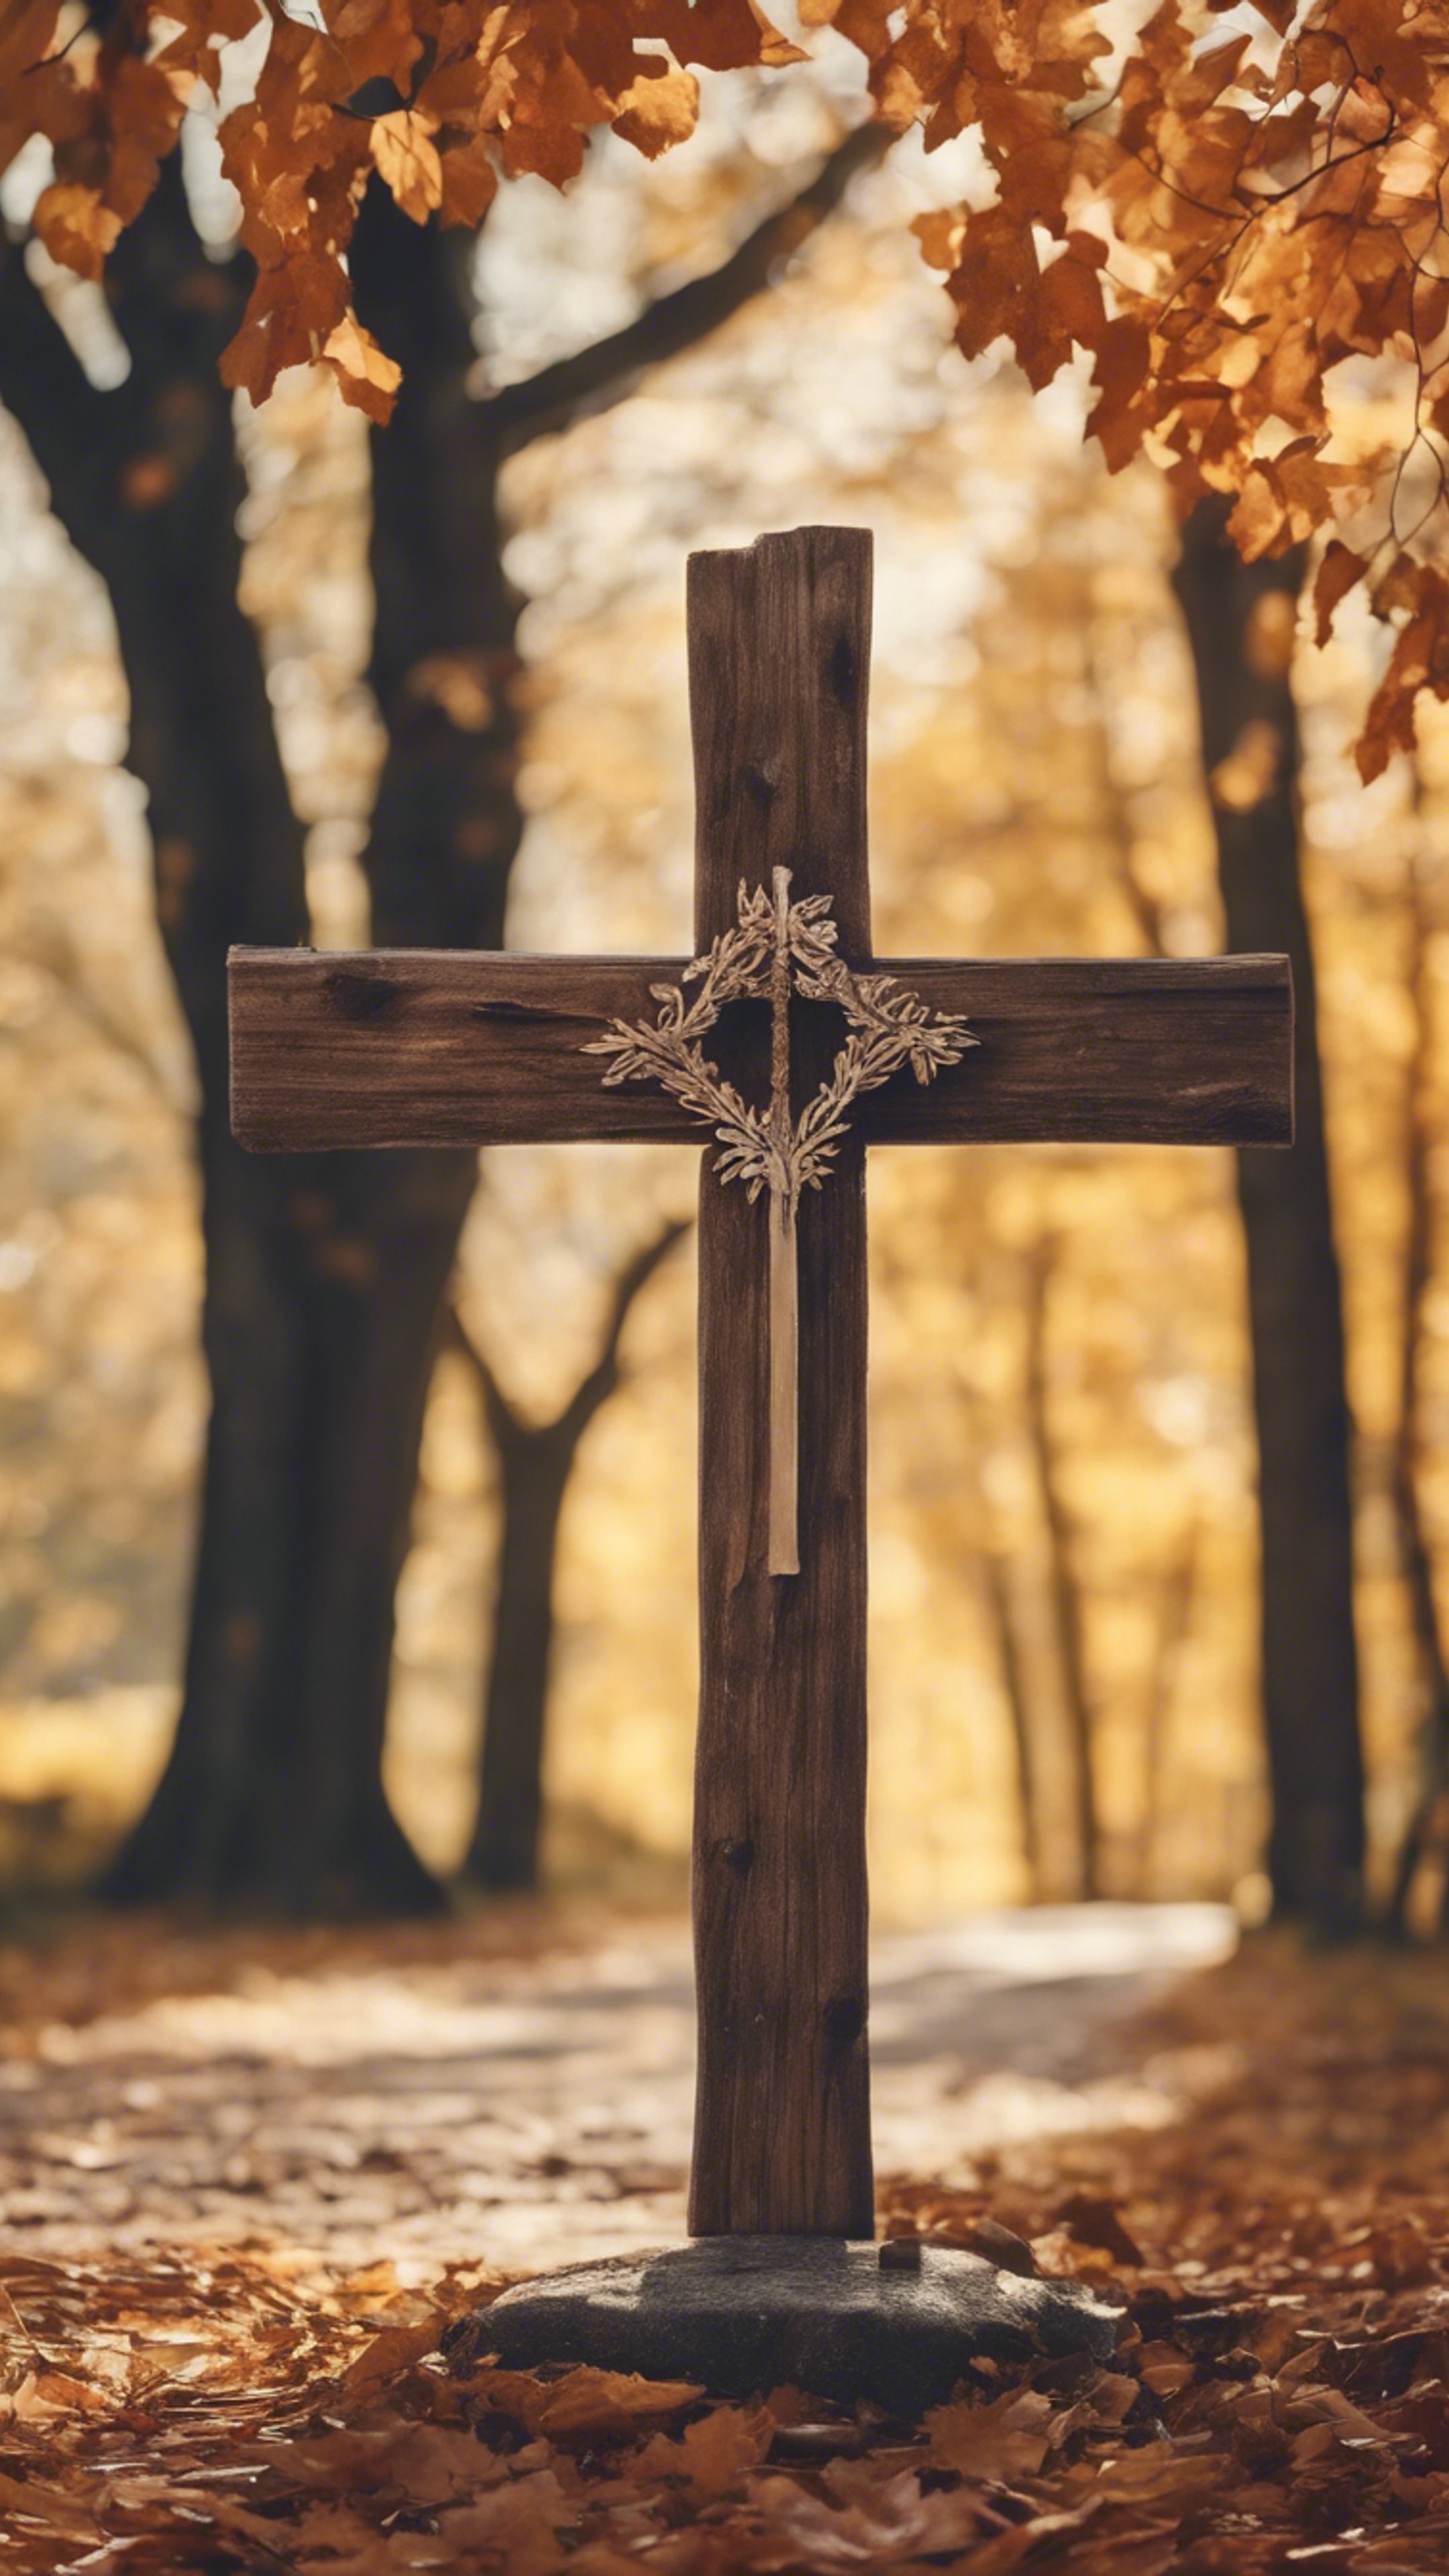 A rustic wooden cross standing by a country road, surrounded by autumn leaves. Tapeta[8ef87987617941c481d6]